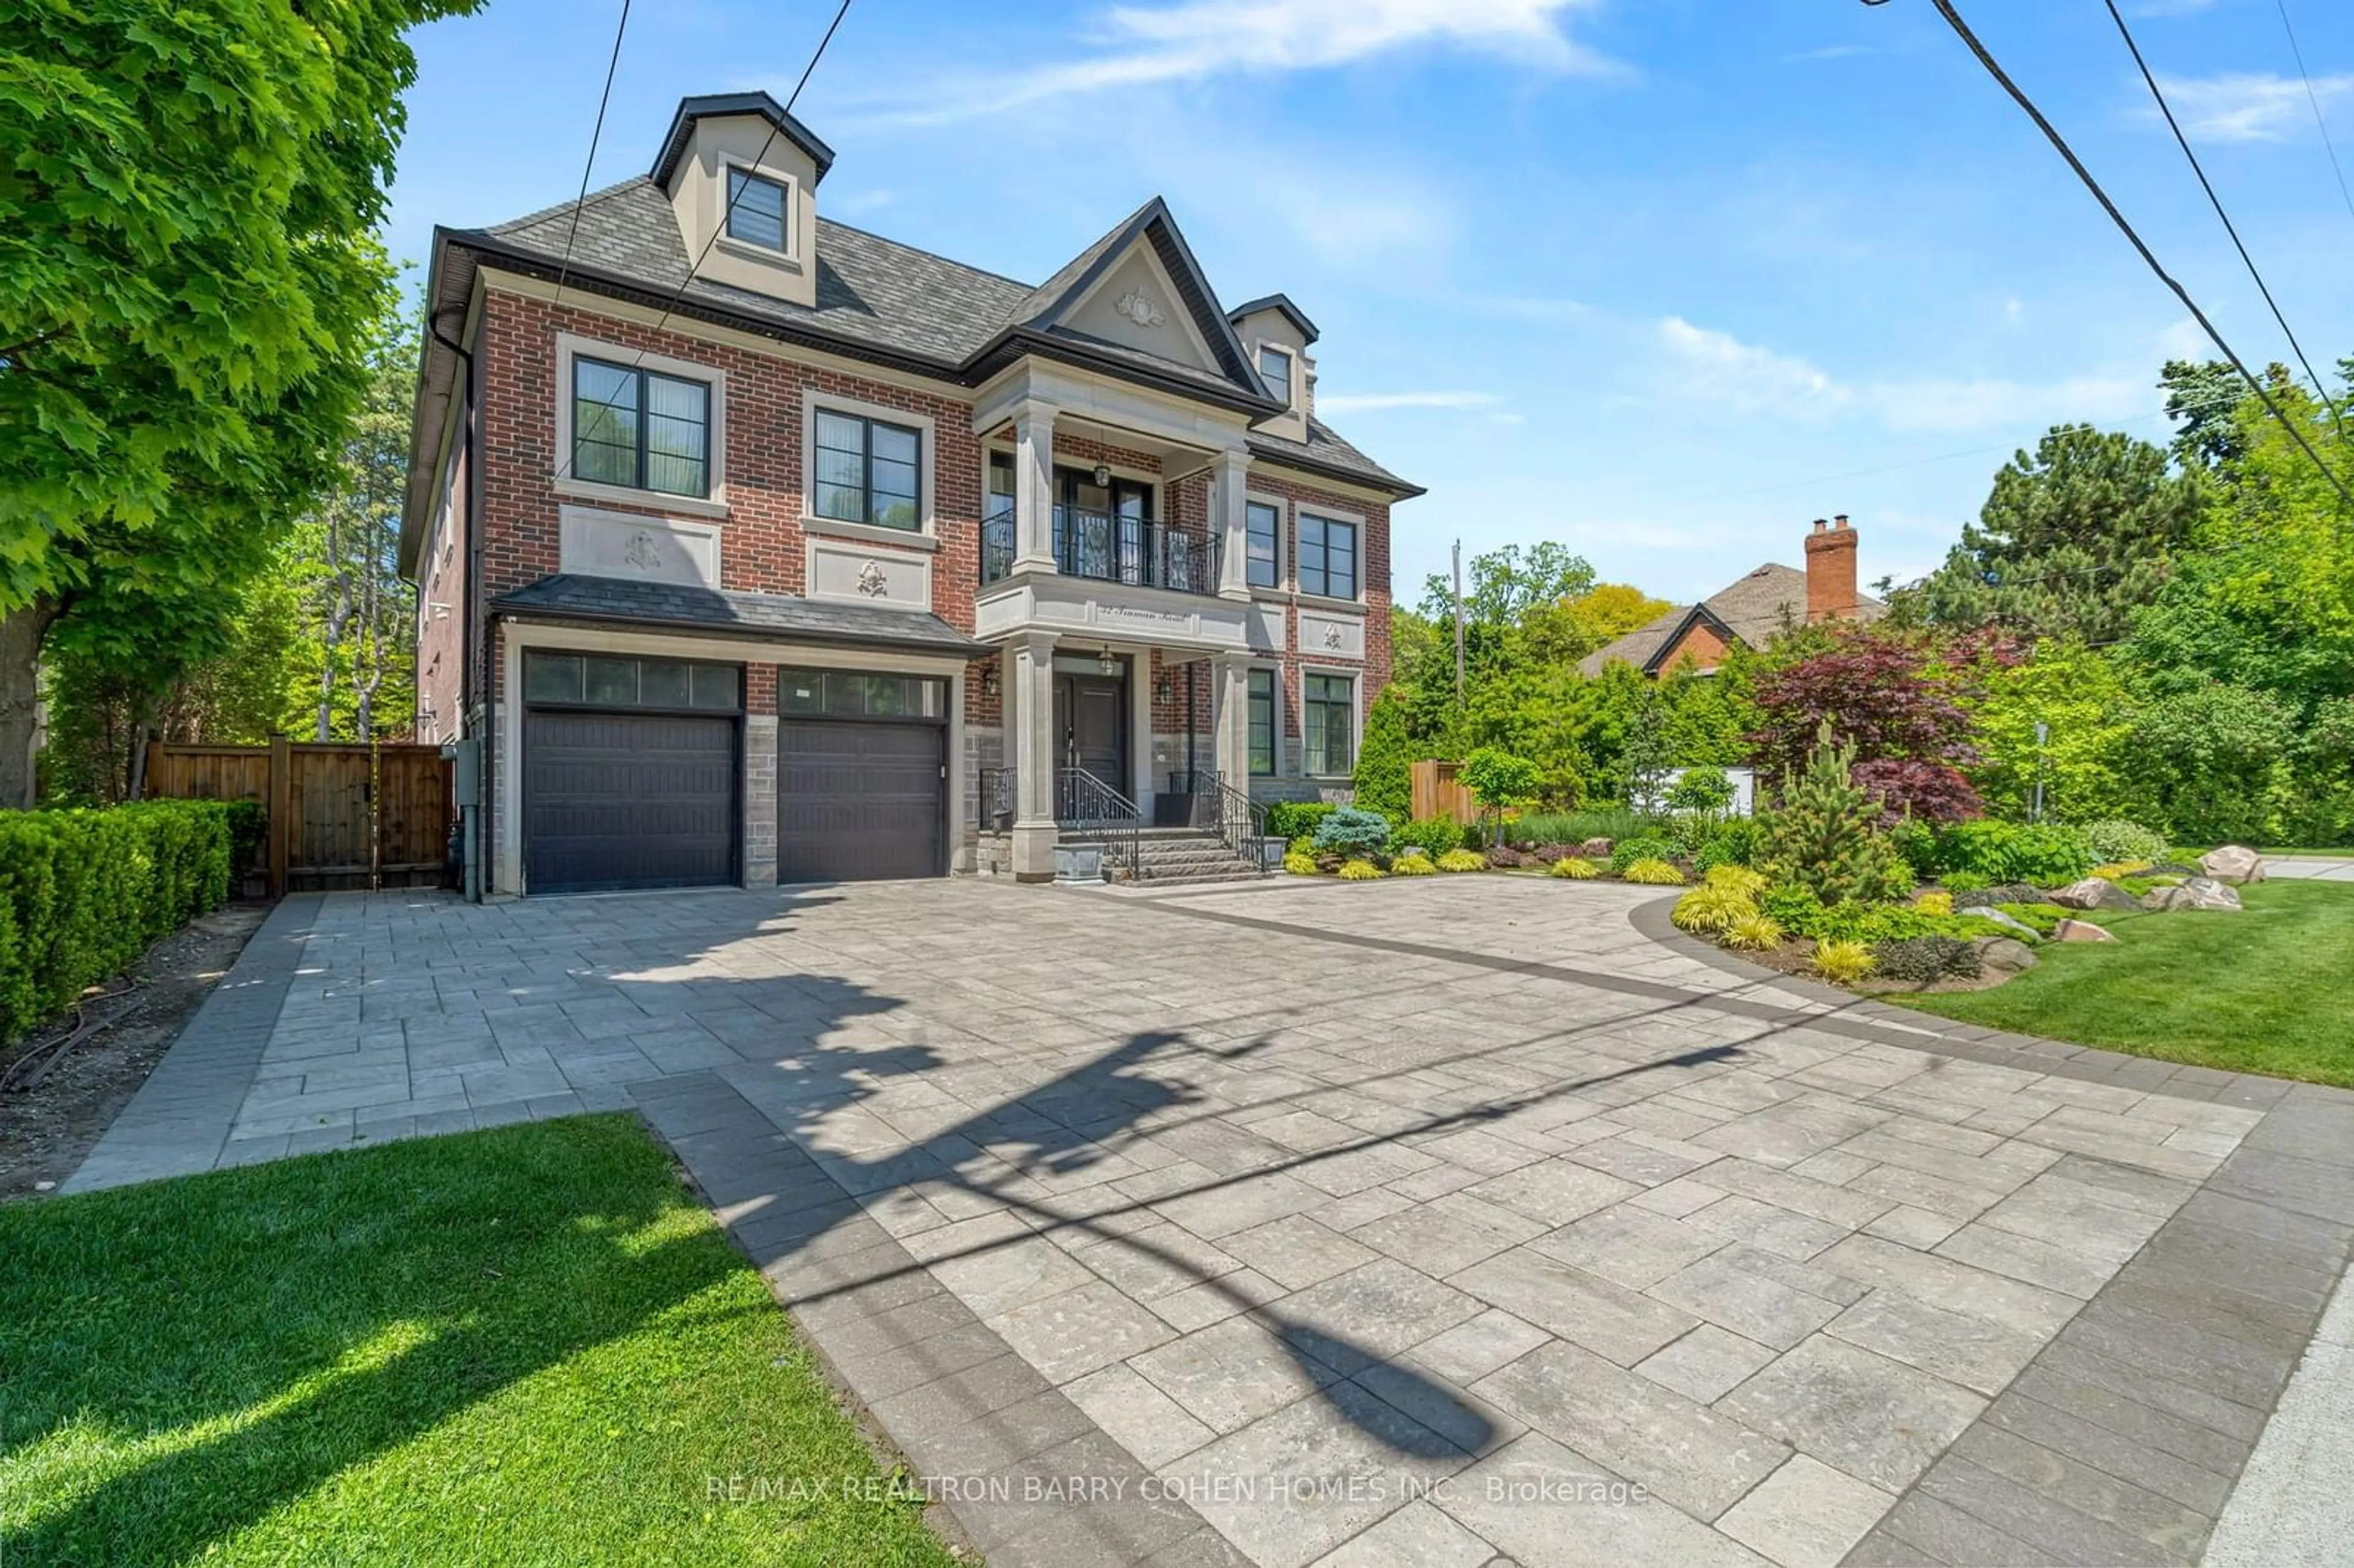 Home with brick exterior material for 32 Truman Rd, Toronto Ontario M2L 2L5